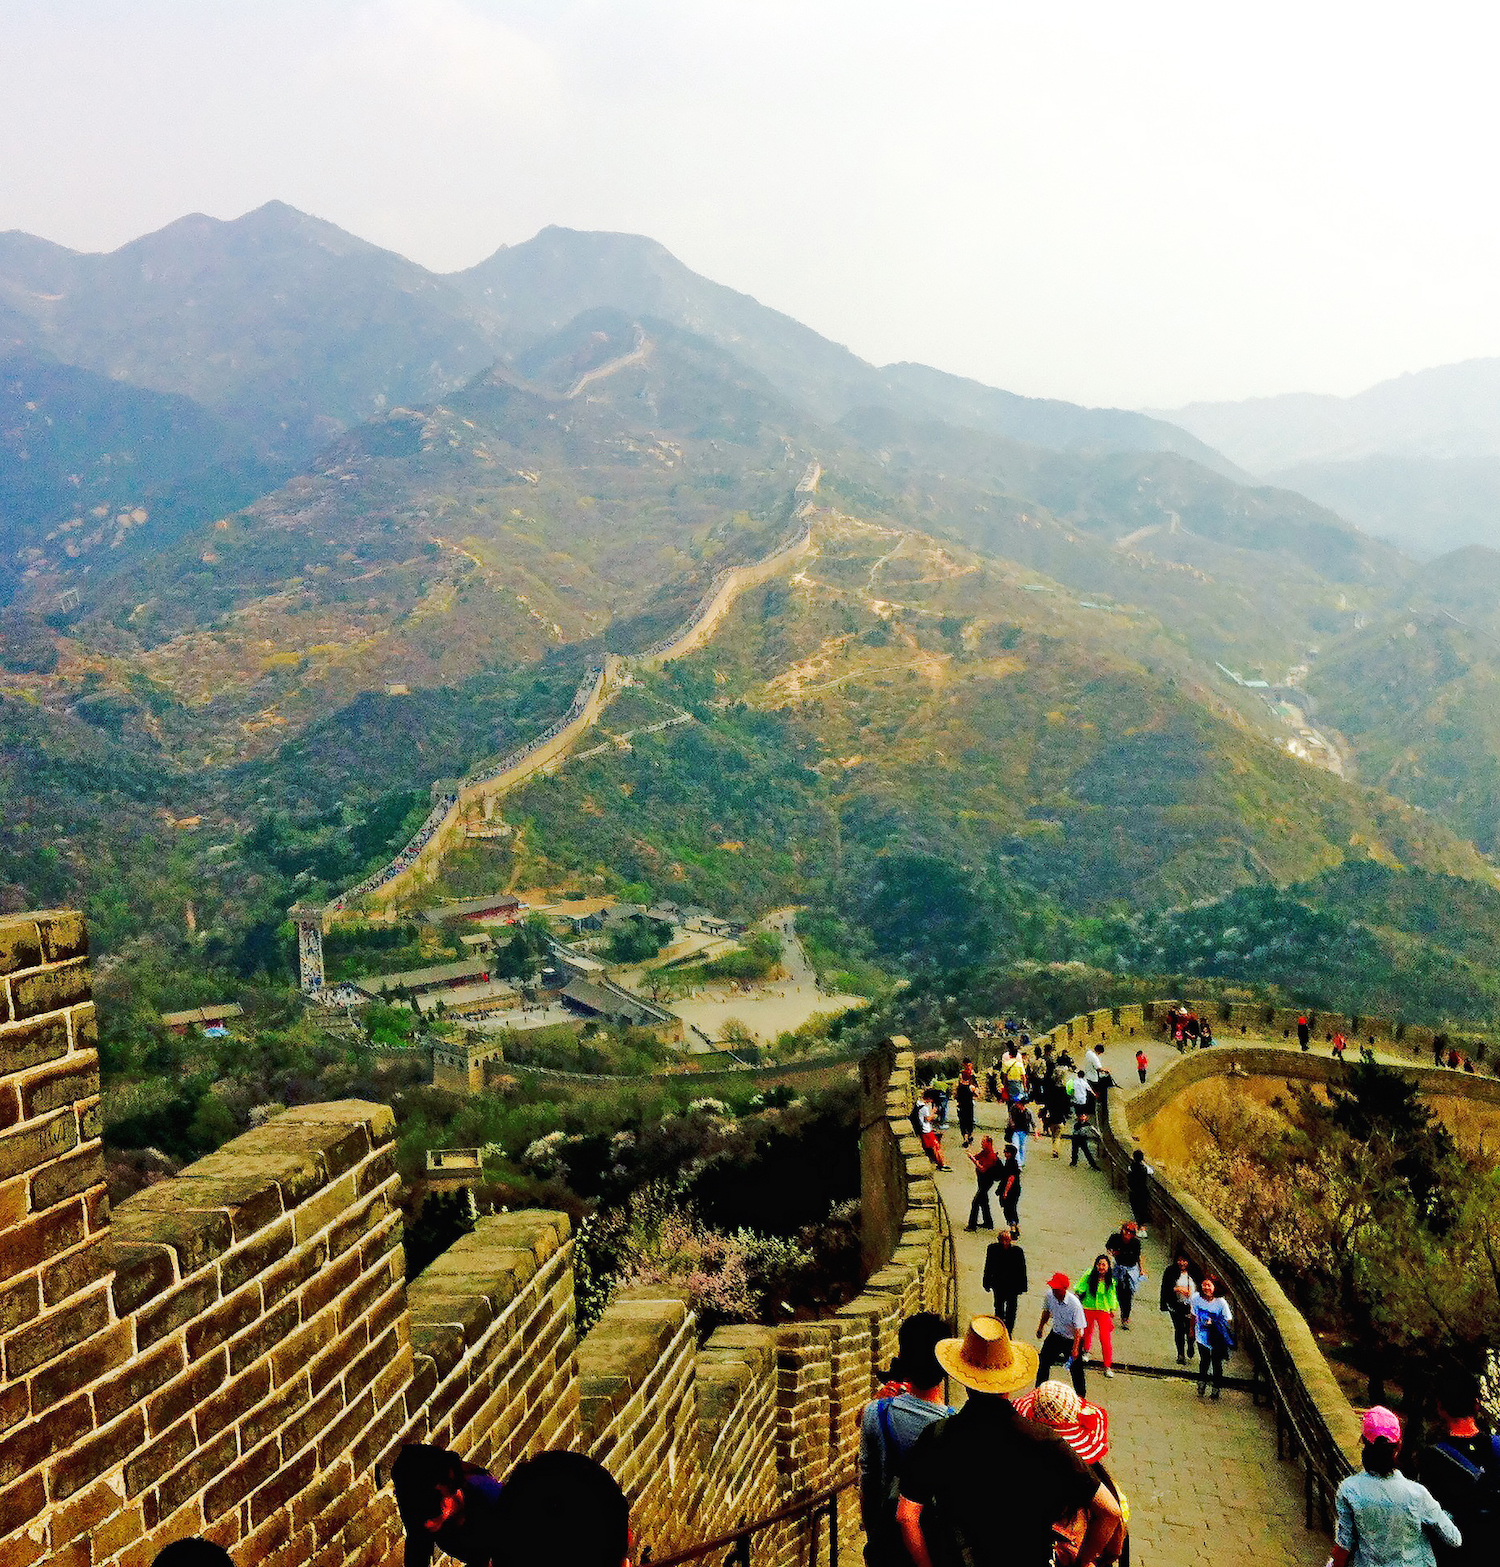 Another item on Clements’ bucket list was to stand on the Great Wall of China.